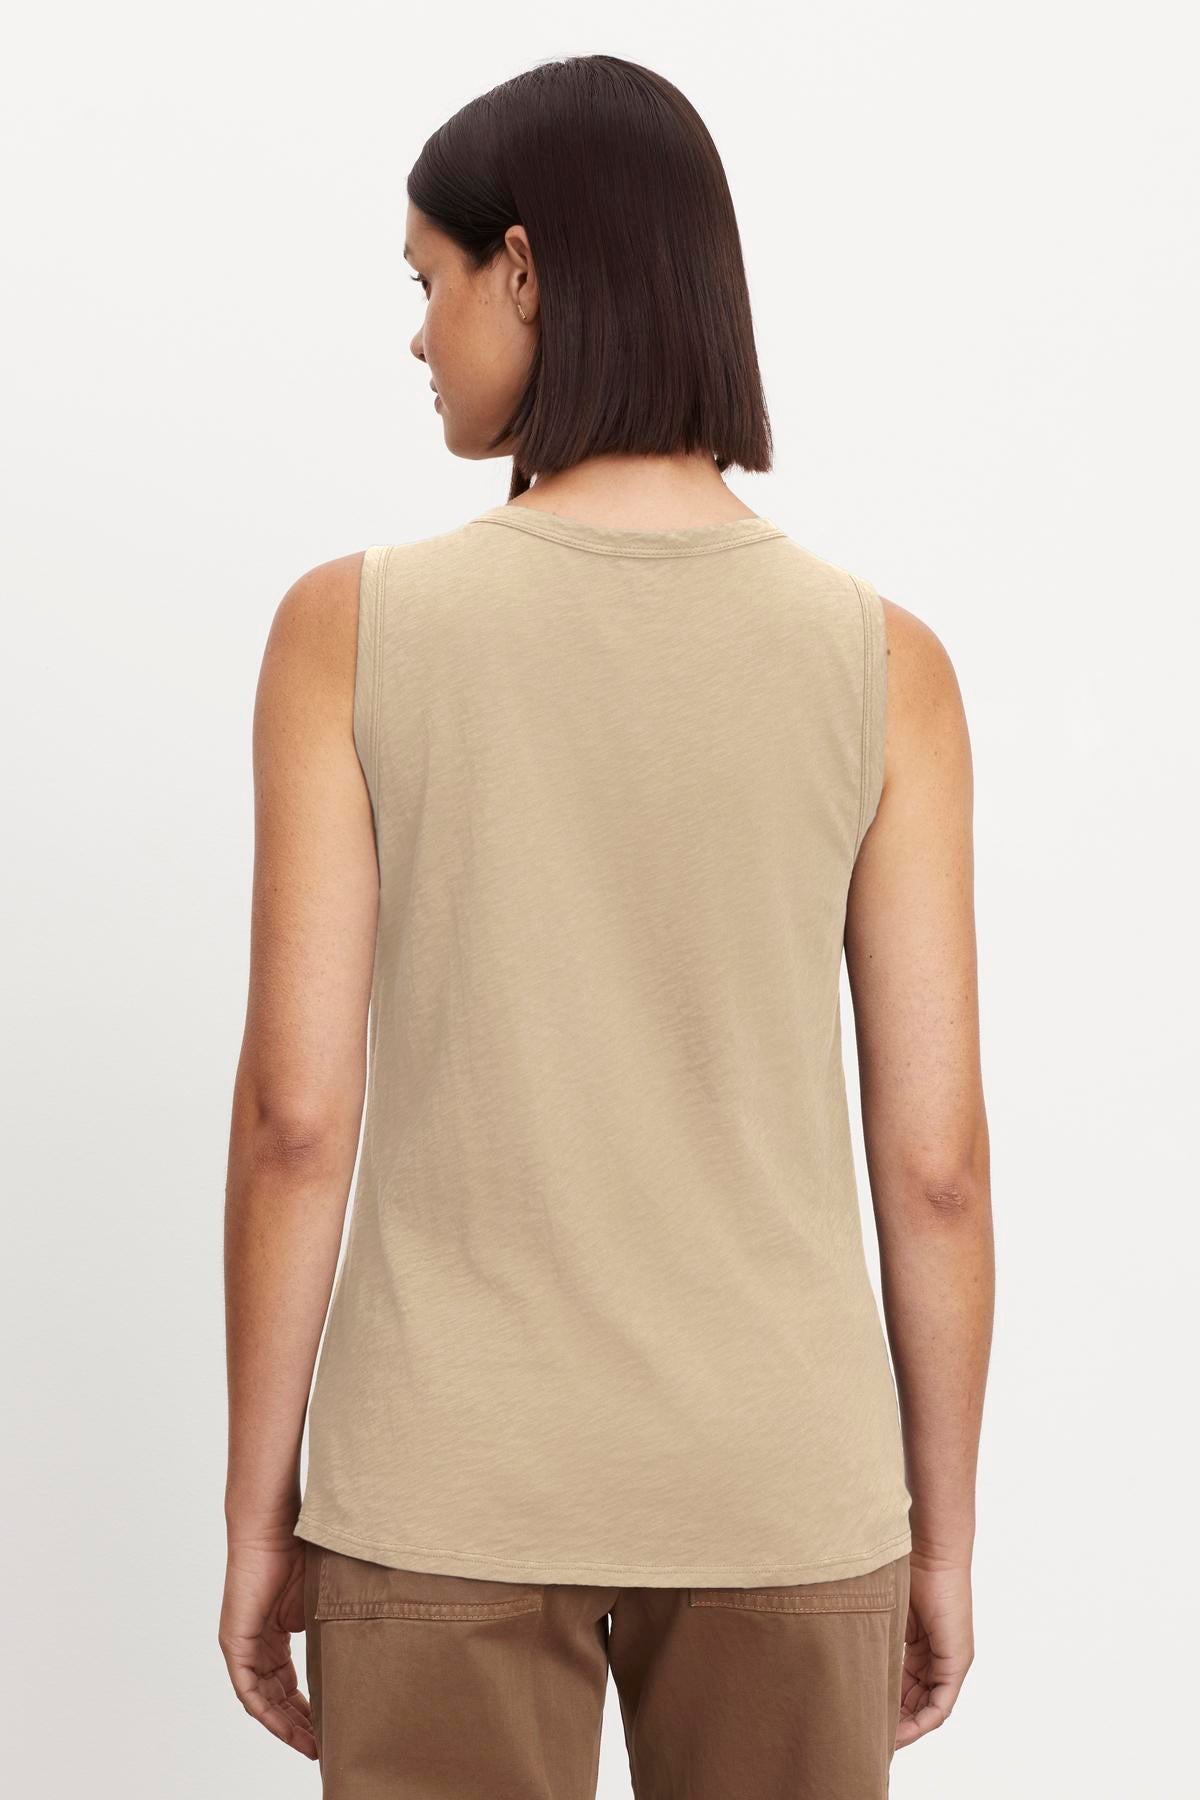 A woman wearing a Velvet by Graham & Spencer Taurus Cotton Slub Tank with a crew-neck design.-36248588320961